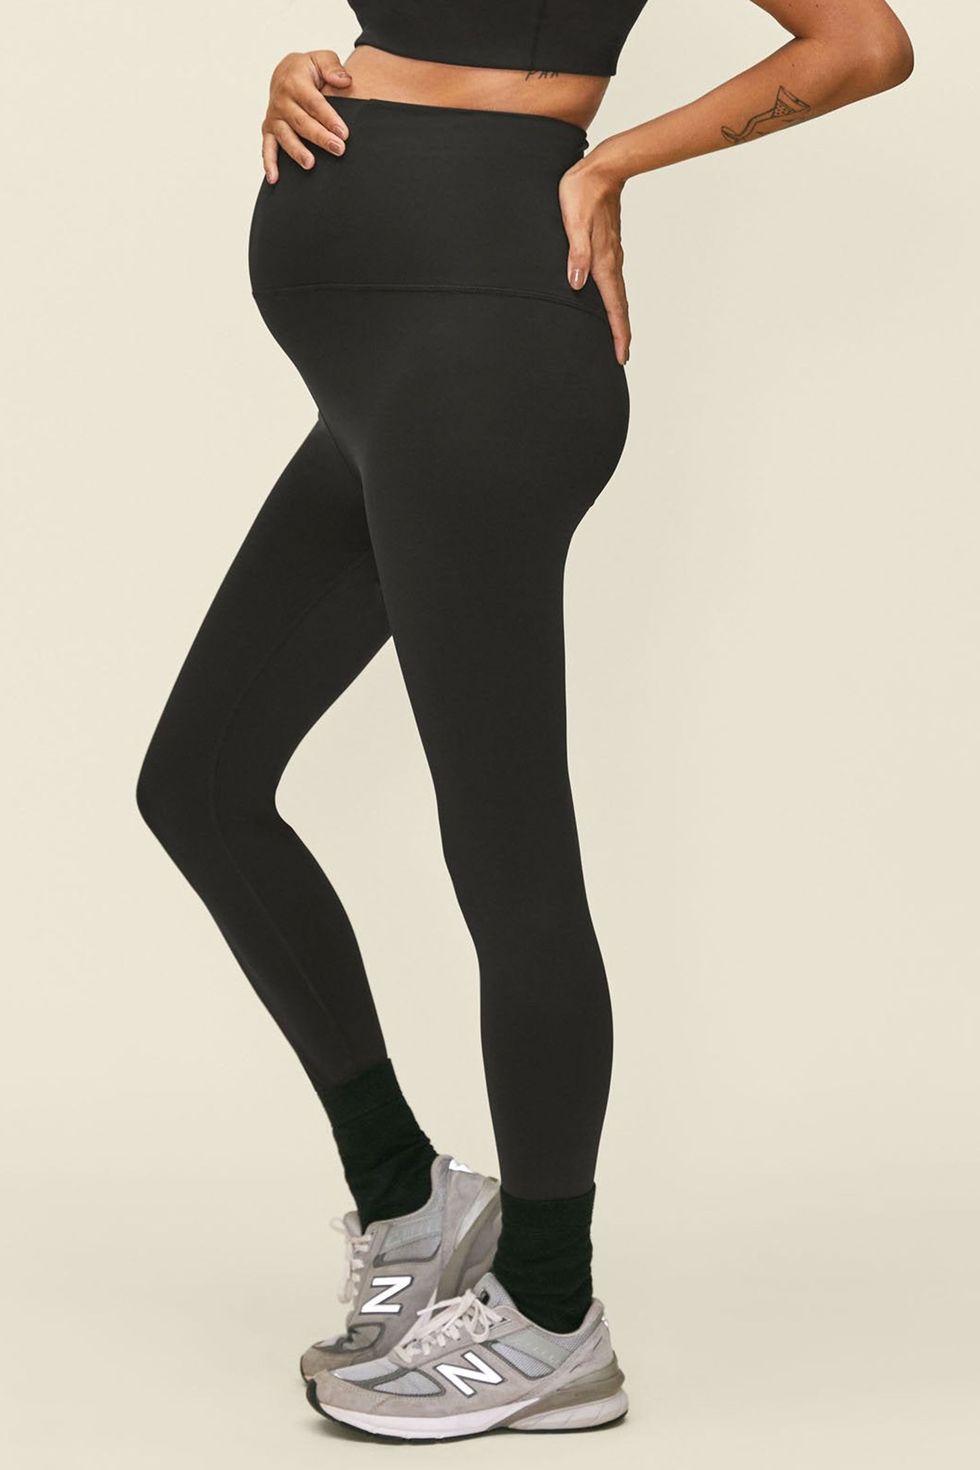 High-Quality Maternity Workout Leggings for Active Moms-to-Be